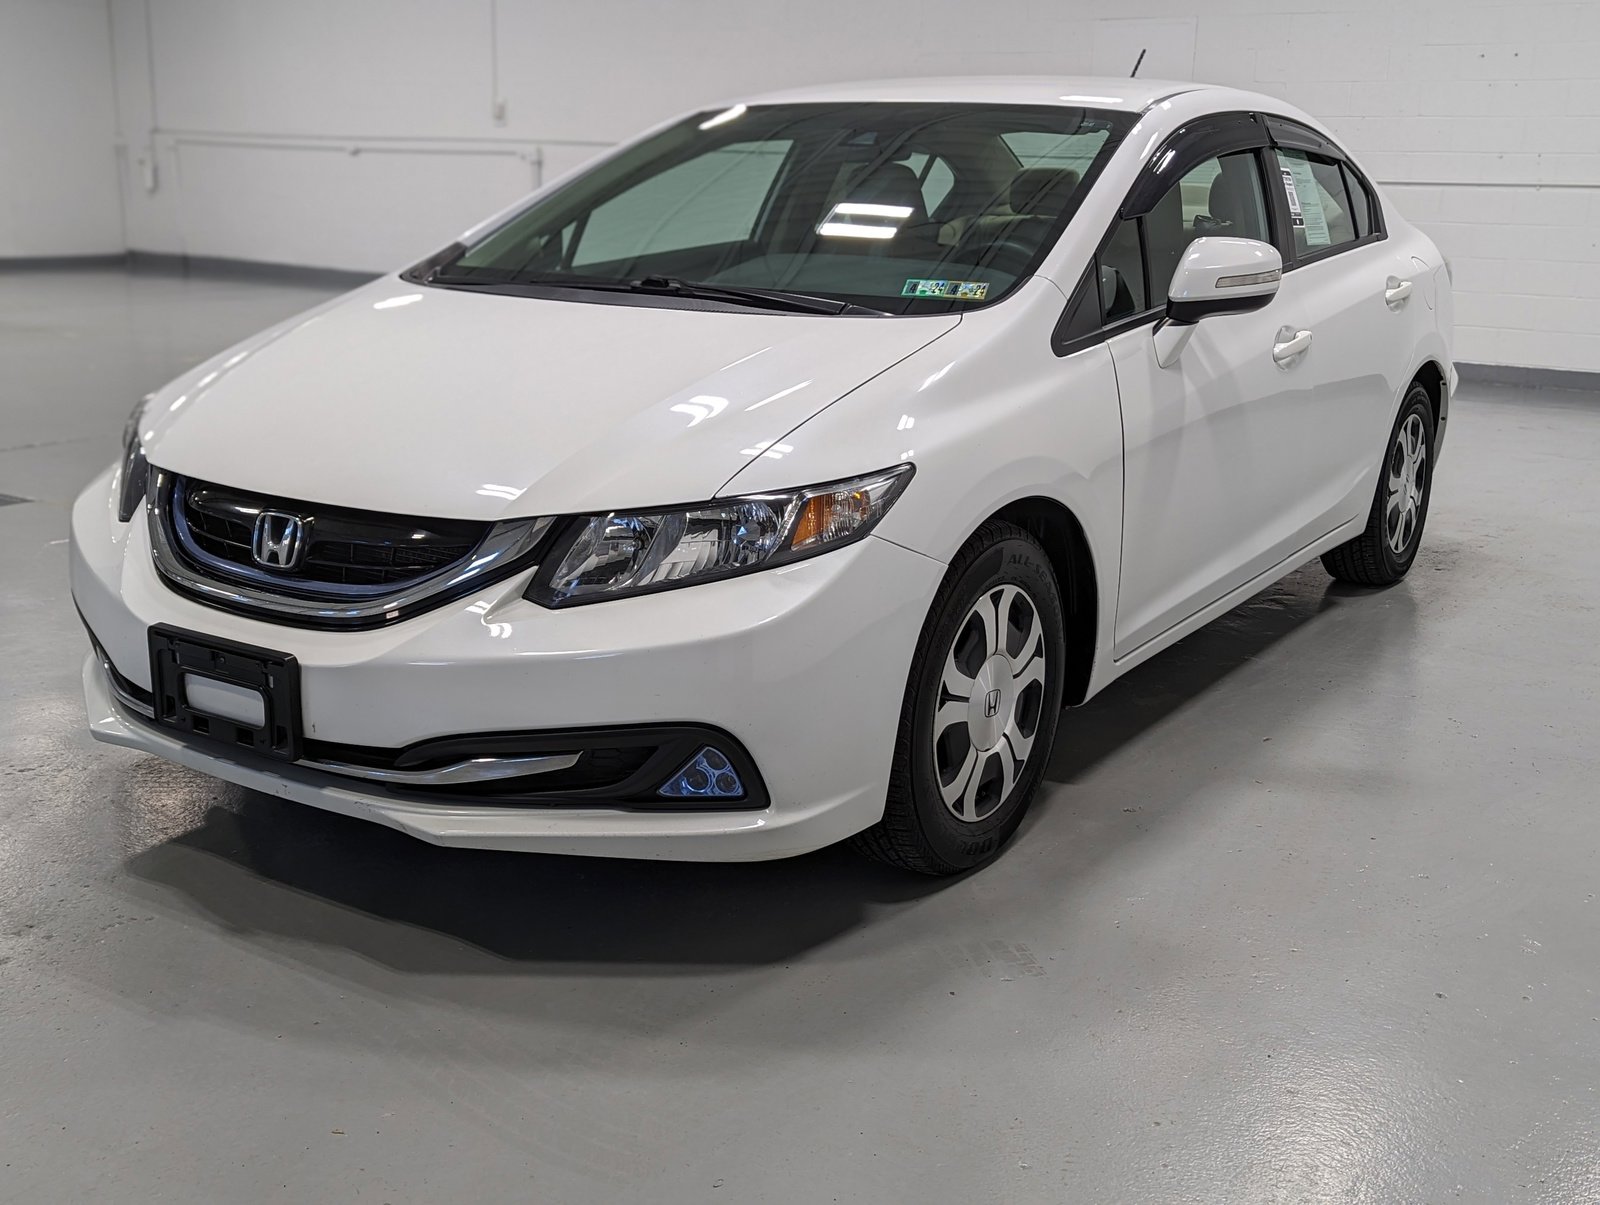 Used 2013 Honda Civic Hybrid for Sale Right Now - Autotrader